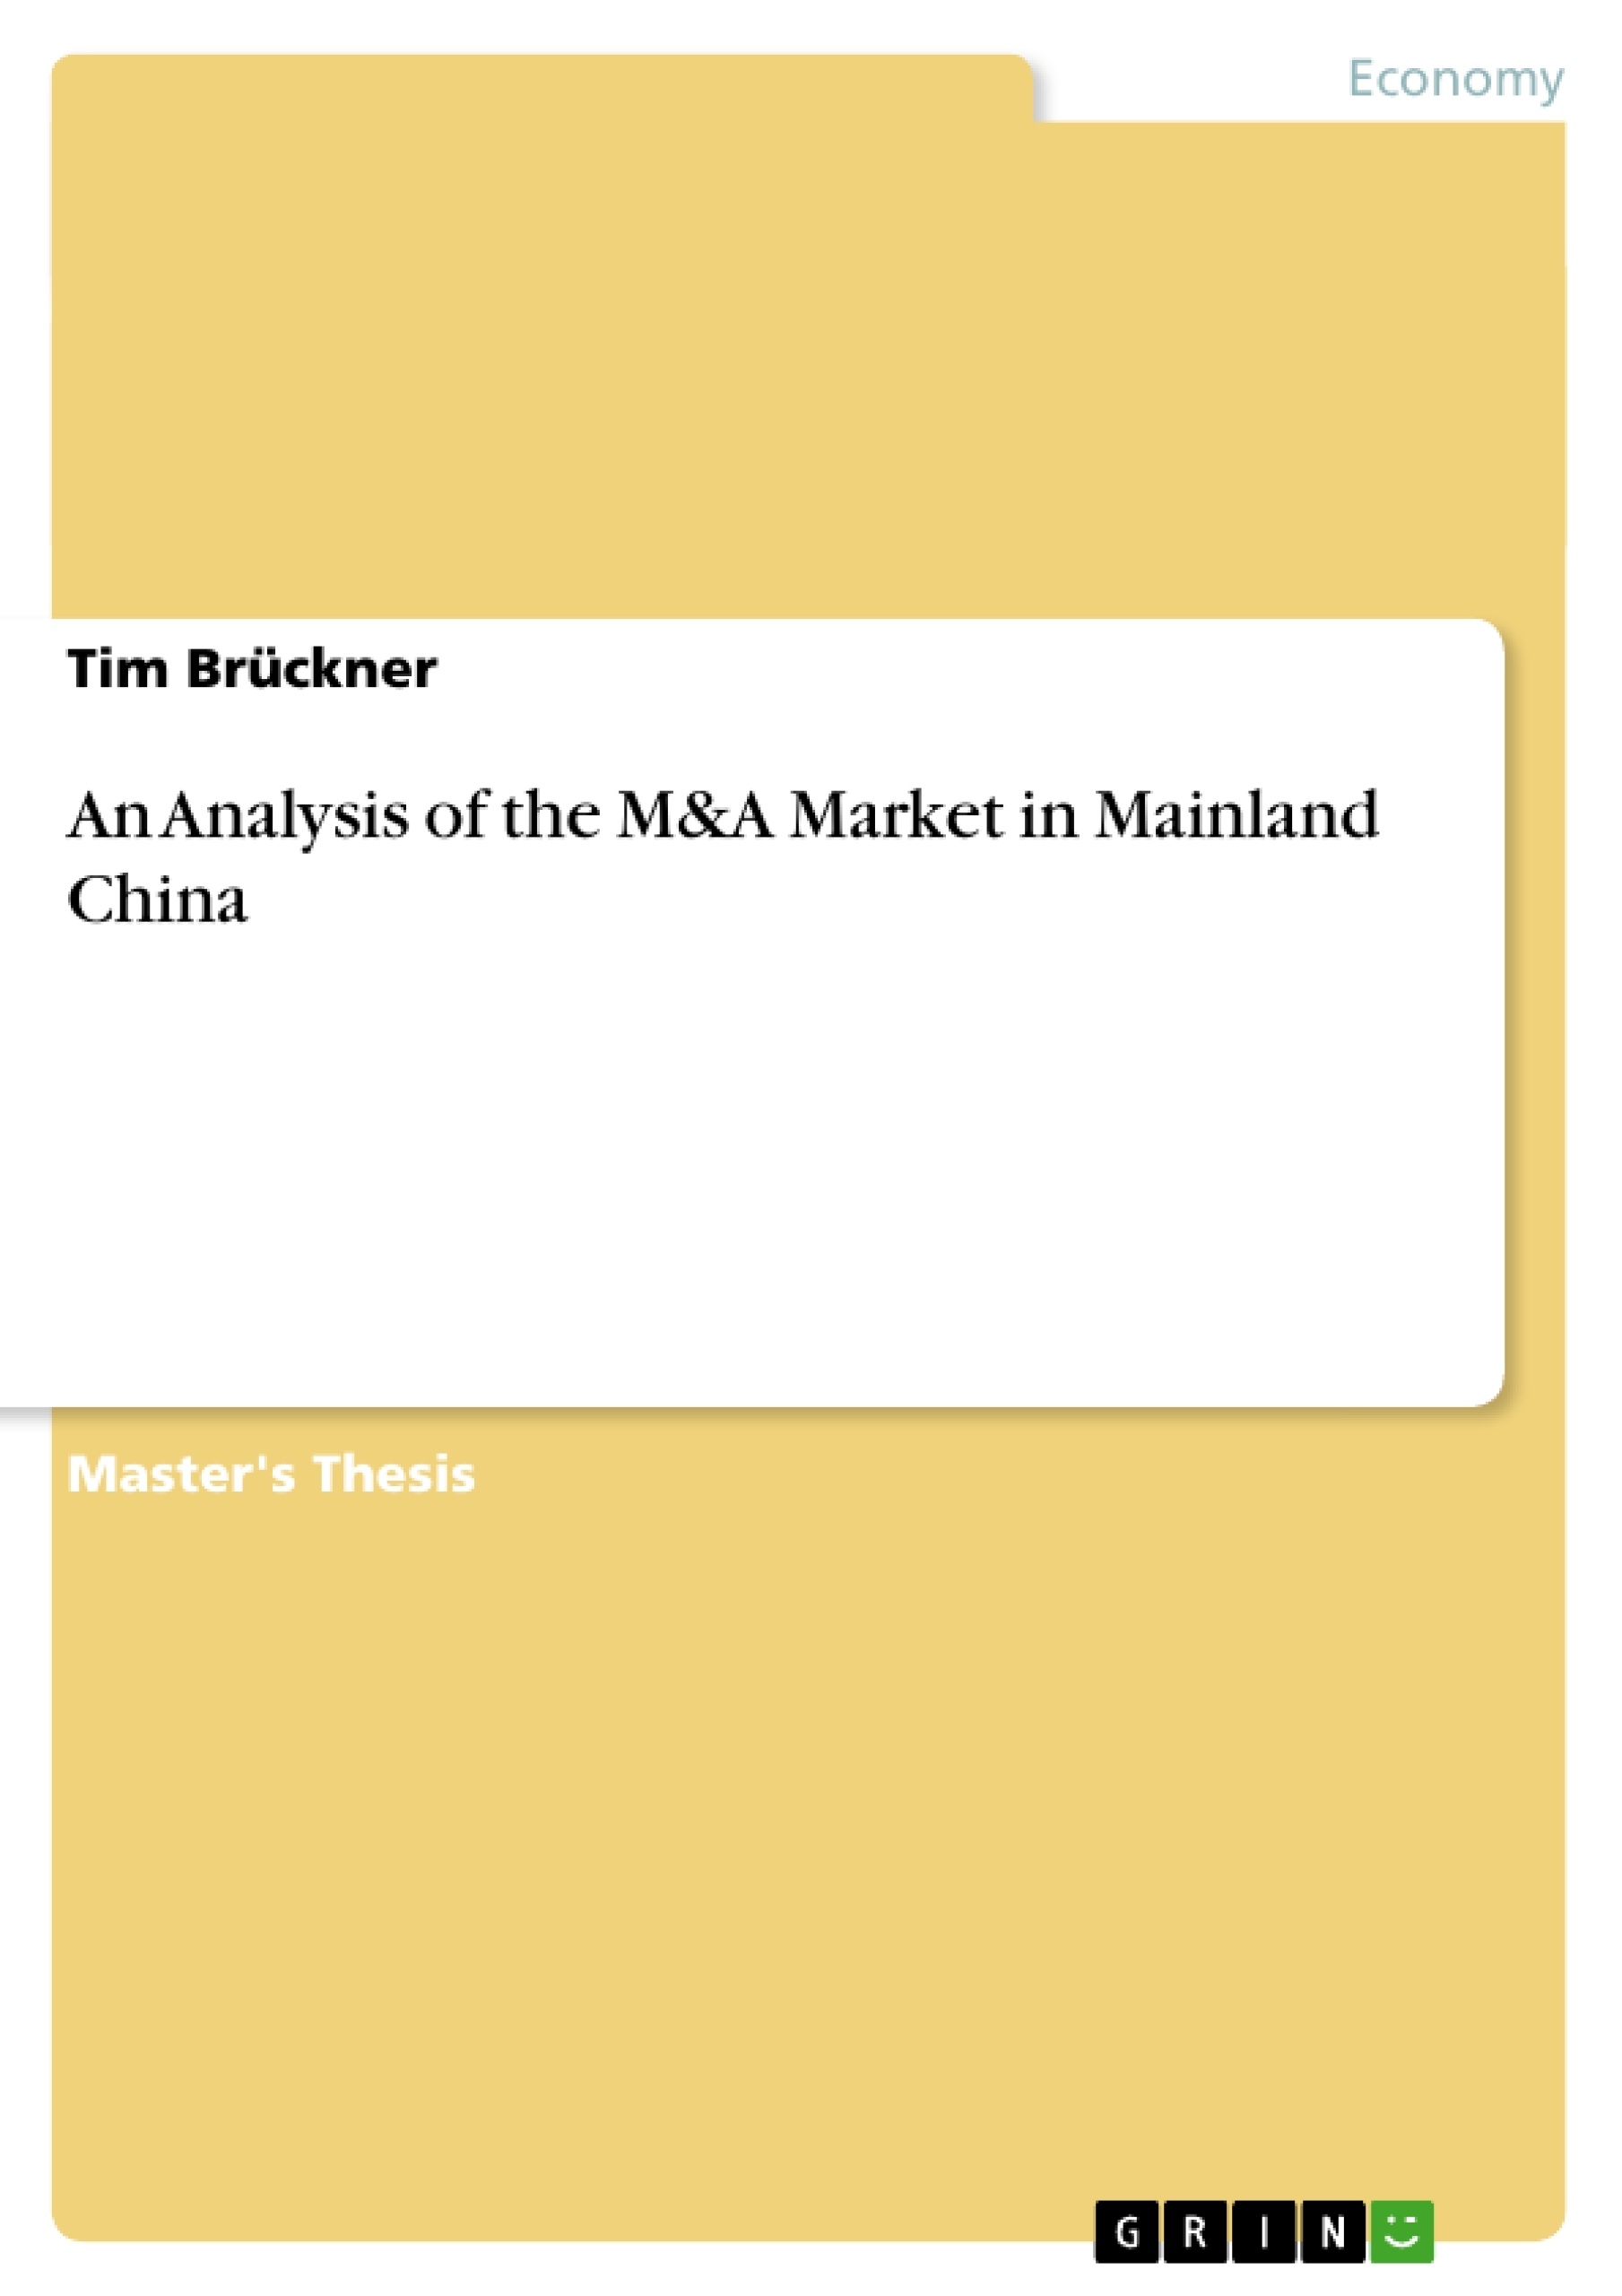 Titre: An Analysis of the M&A Market in Mainland China